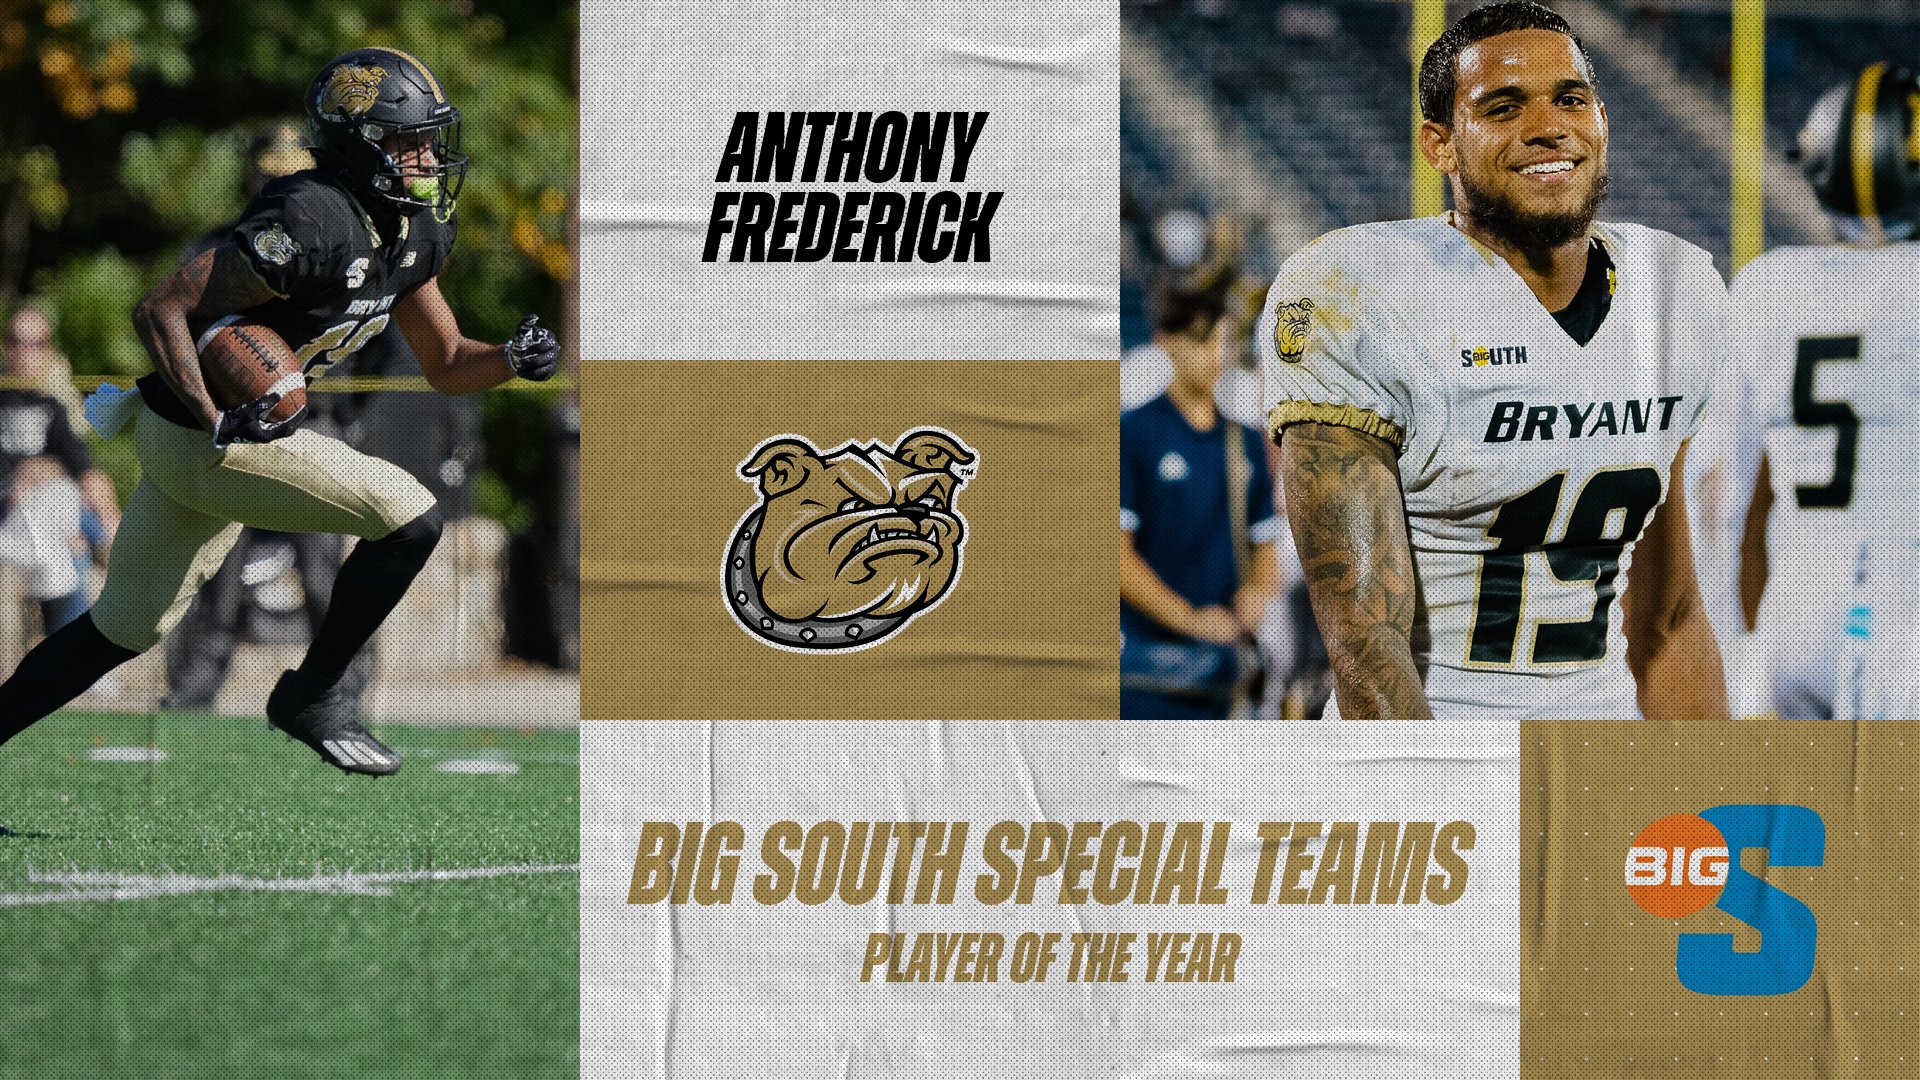 Frederick named Big South Special Teams Player of the Year; 9 named All-Big South